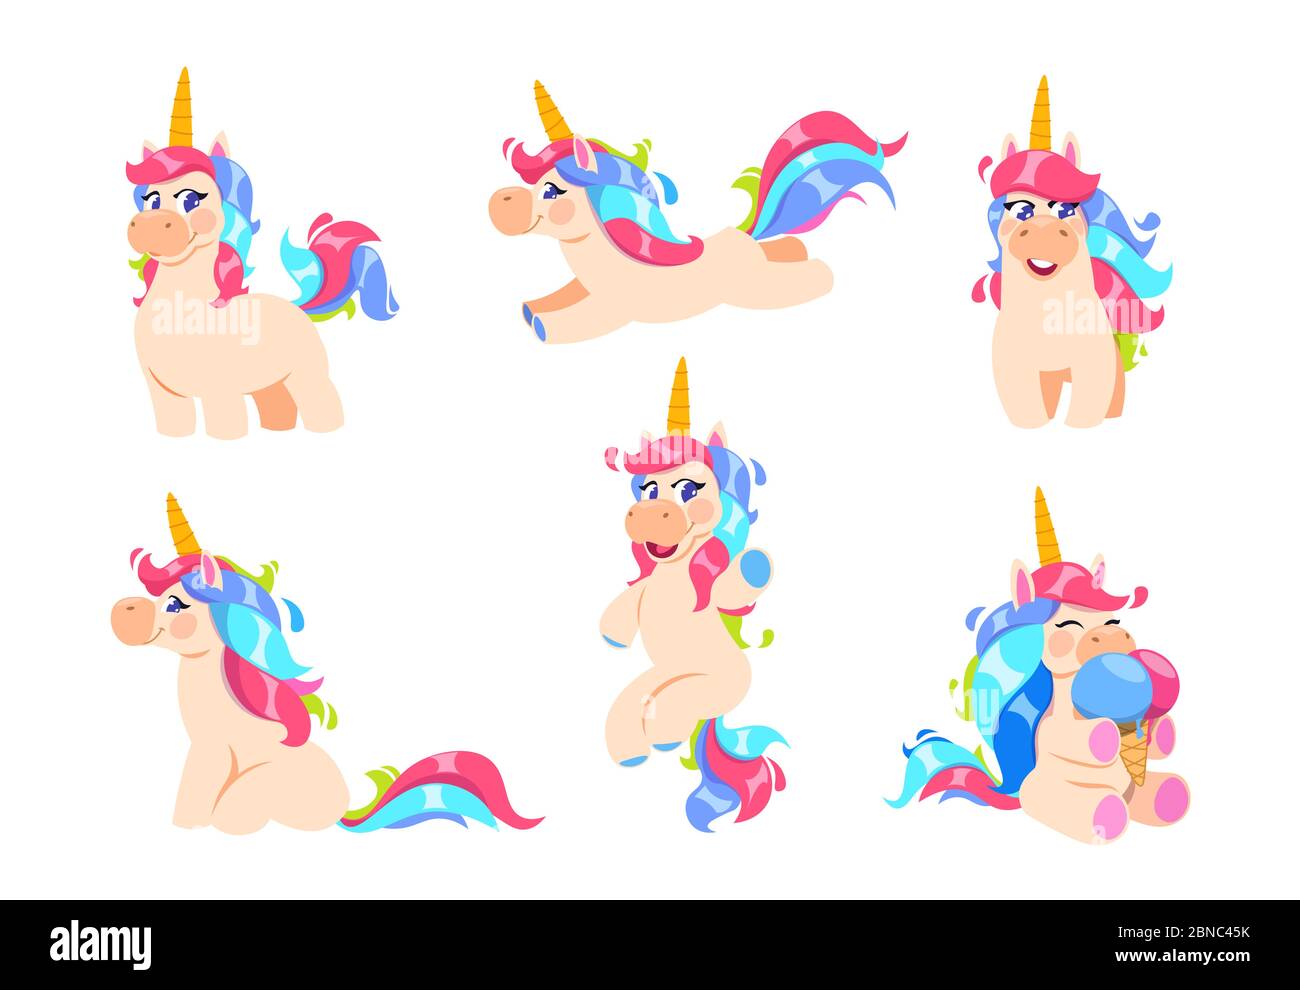 Cute unicorns. Cartoon fairy pony, magic baby horse animal. Fairytale vector characters. Illustration of magic pony with horn and colored mane Stock Vector